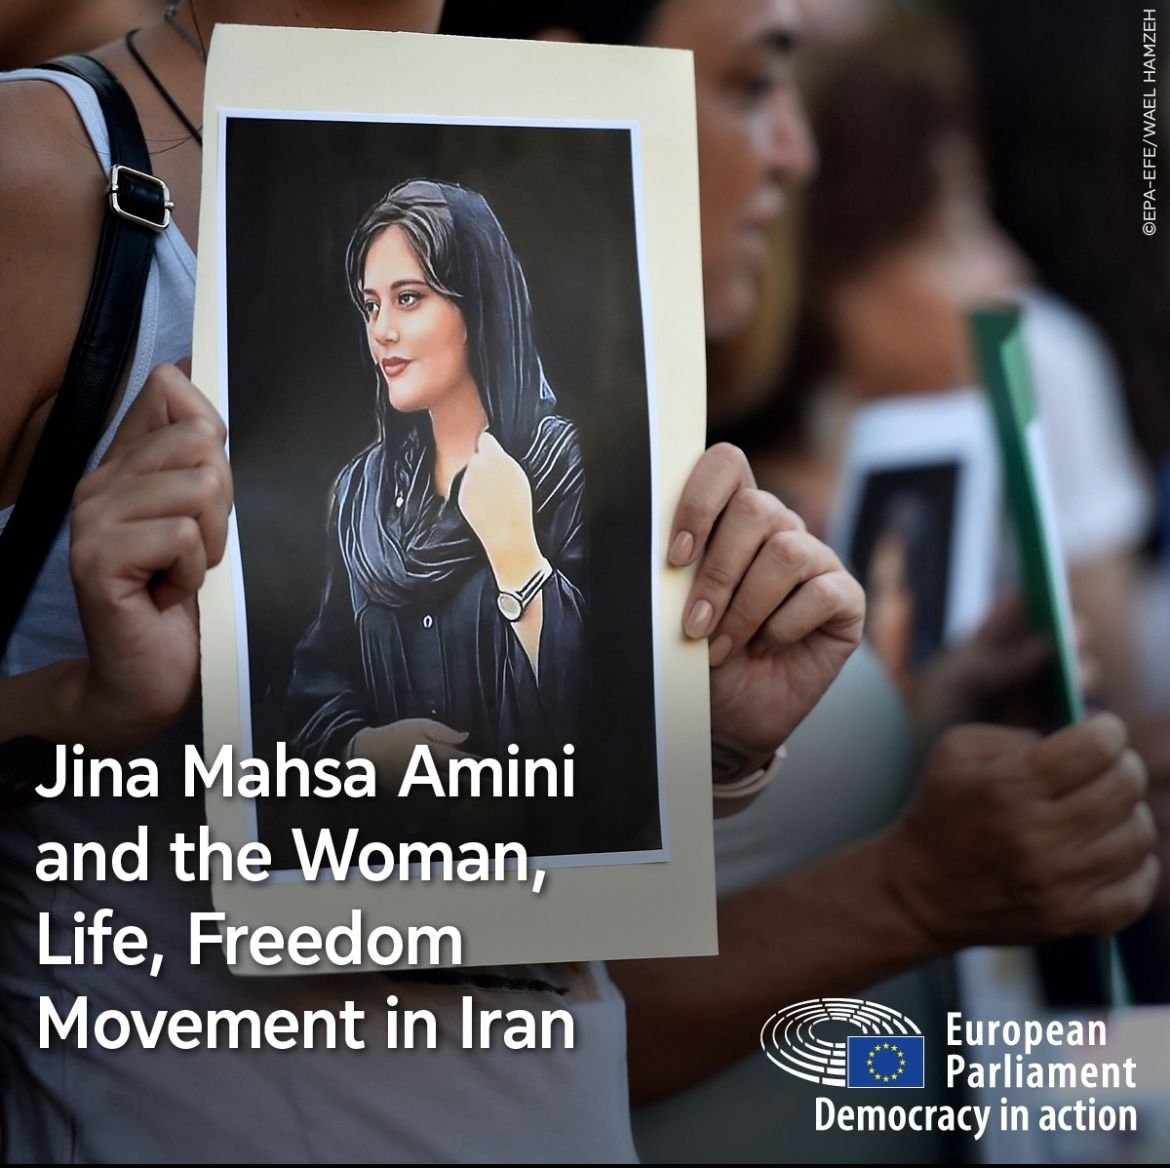 Women. Life. Freedom. Today the European Parliament awarded the 2023 #SakharovPrize to #MahsaAmini & the #WomenLifeFreedom Movement in Iran. These brave women, men & young people have inspired the world through their fight for equality, liberty & dignity.